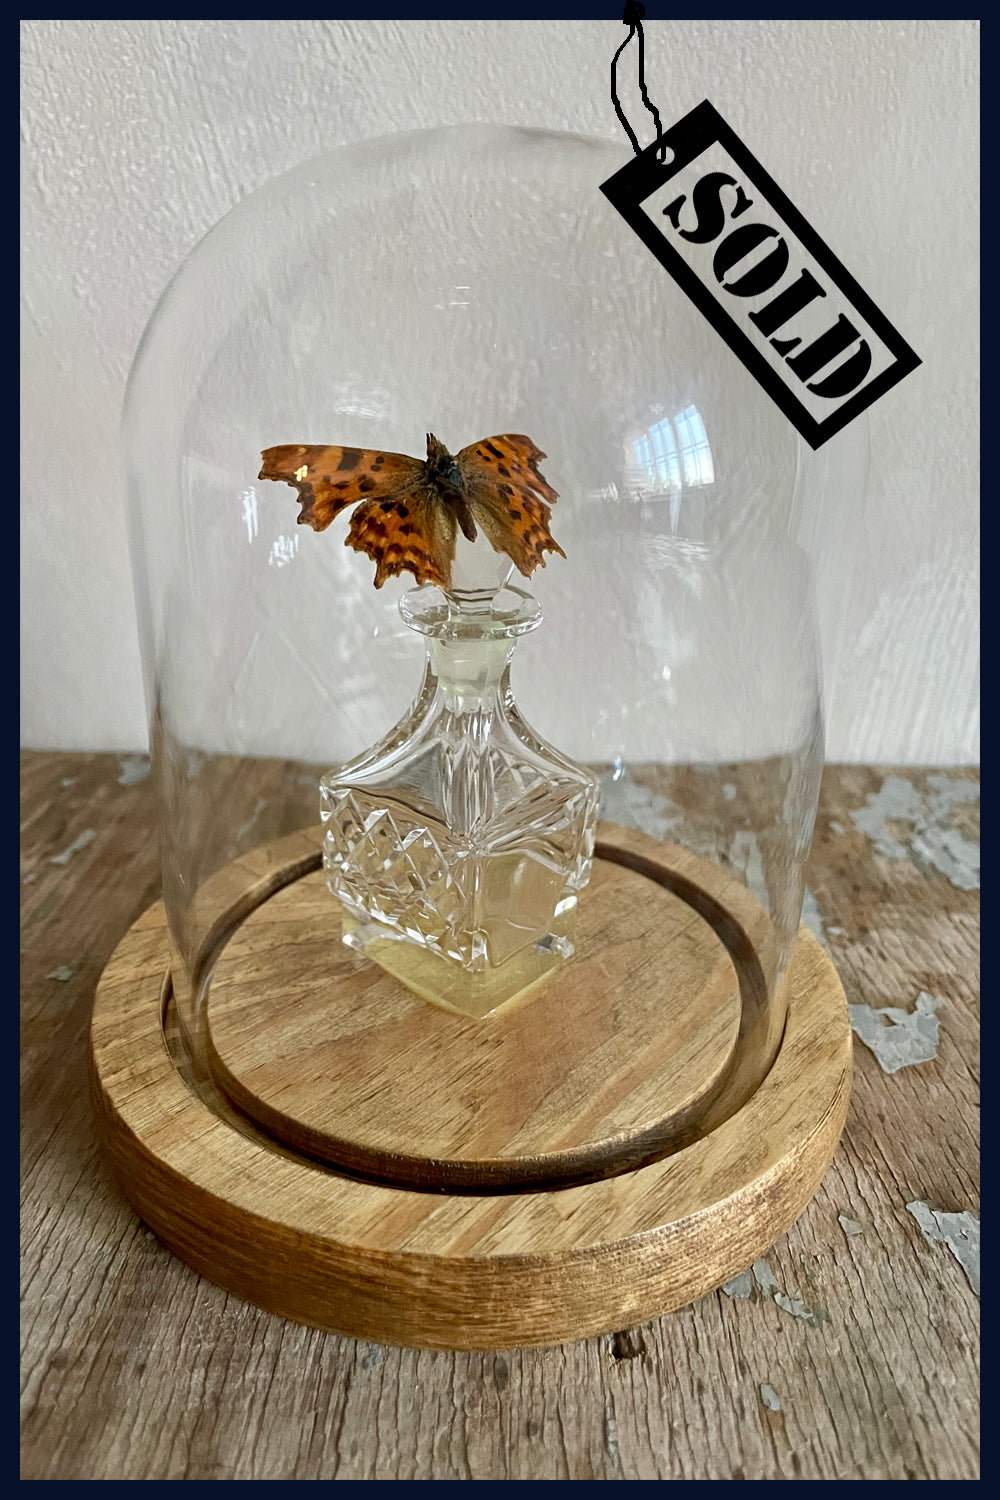 SOLD - Enigma Variations Collection: Vintage Cut-Crystal Bottle with a Vintage Butterfly in a Glass Display Dome